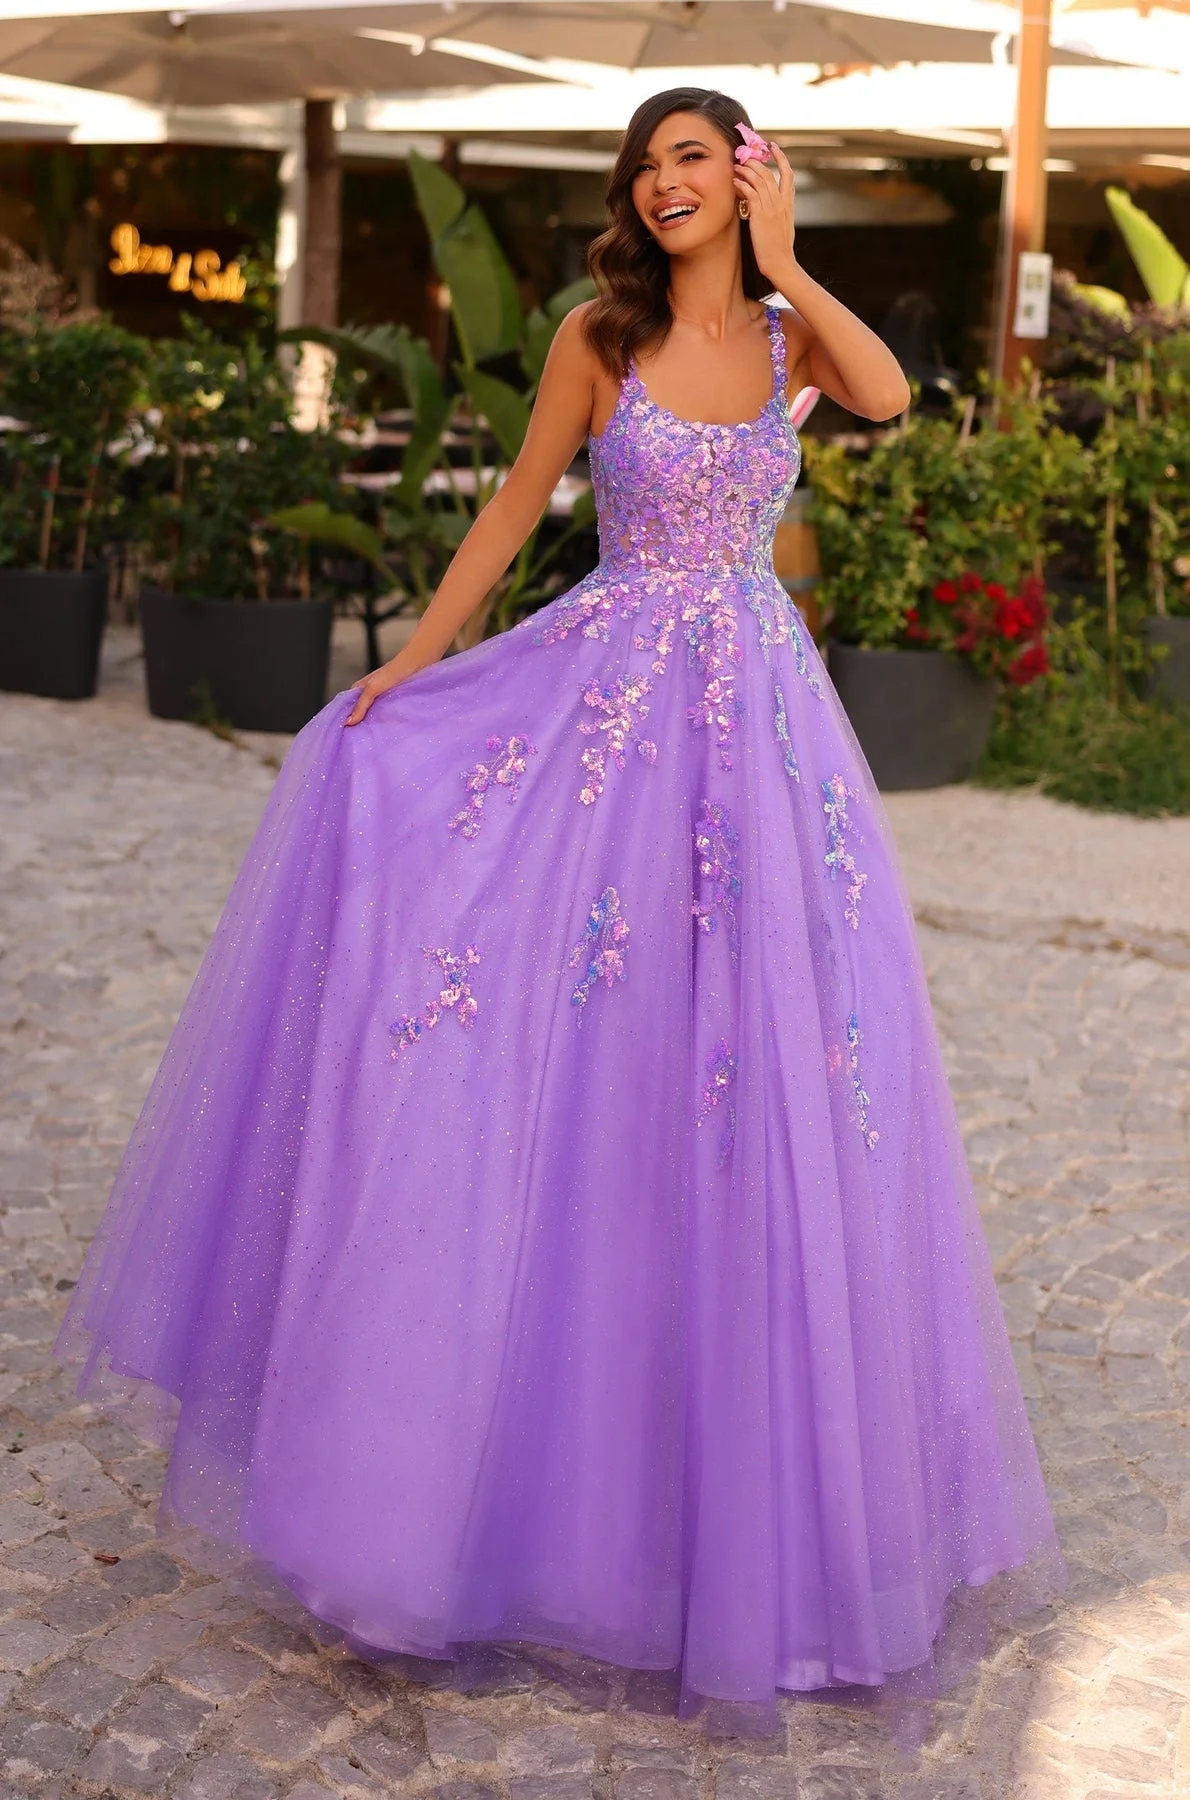 

Tulle Spaghetti Straps A-line Prom Dresses Lilac U-neck Flower Applique Sequin Graduation Dress Sparkly Backless Long Party Gown